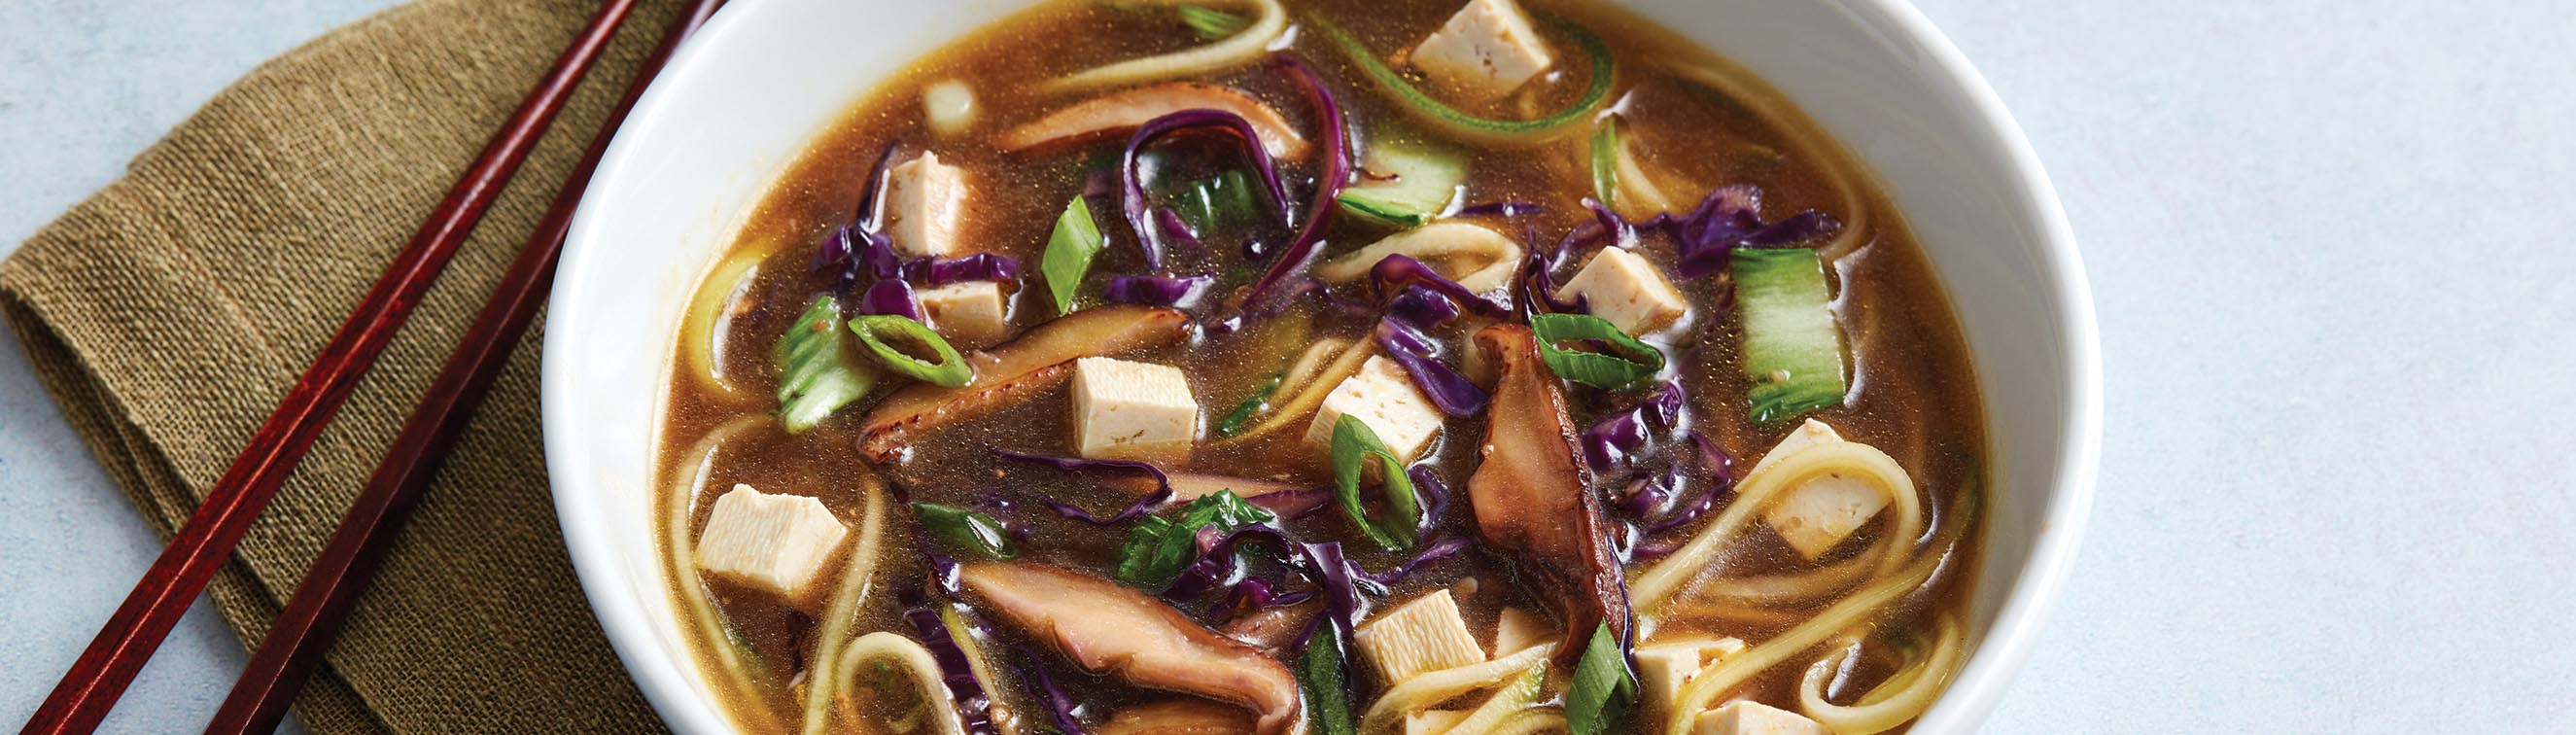 A bowl of Zucchini and yellow squash noodles topped with tofu, bok choy, cabbage, and mushrooms in a hot miso broth.